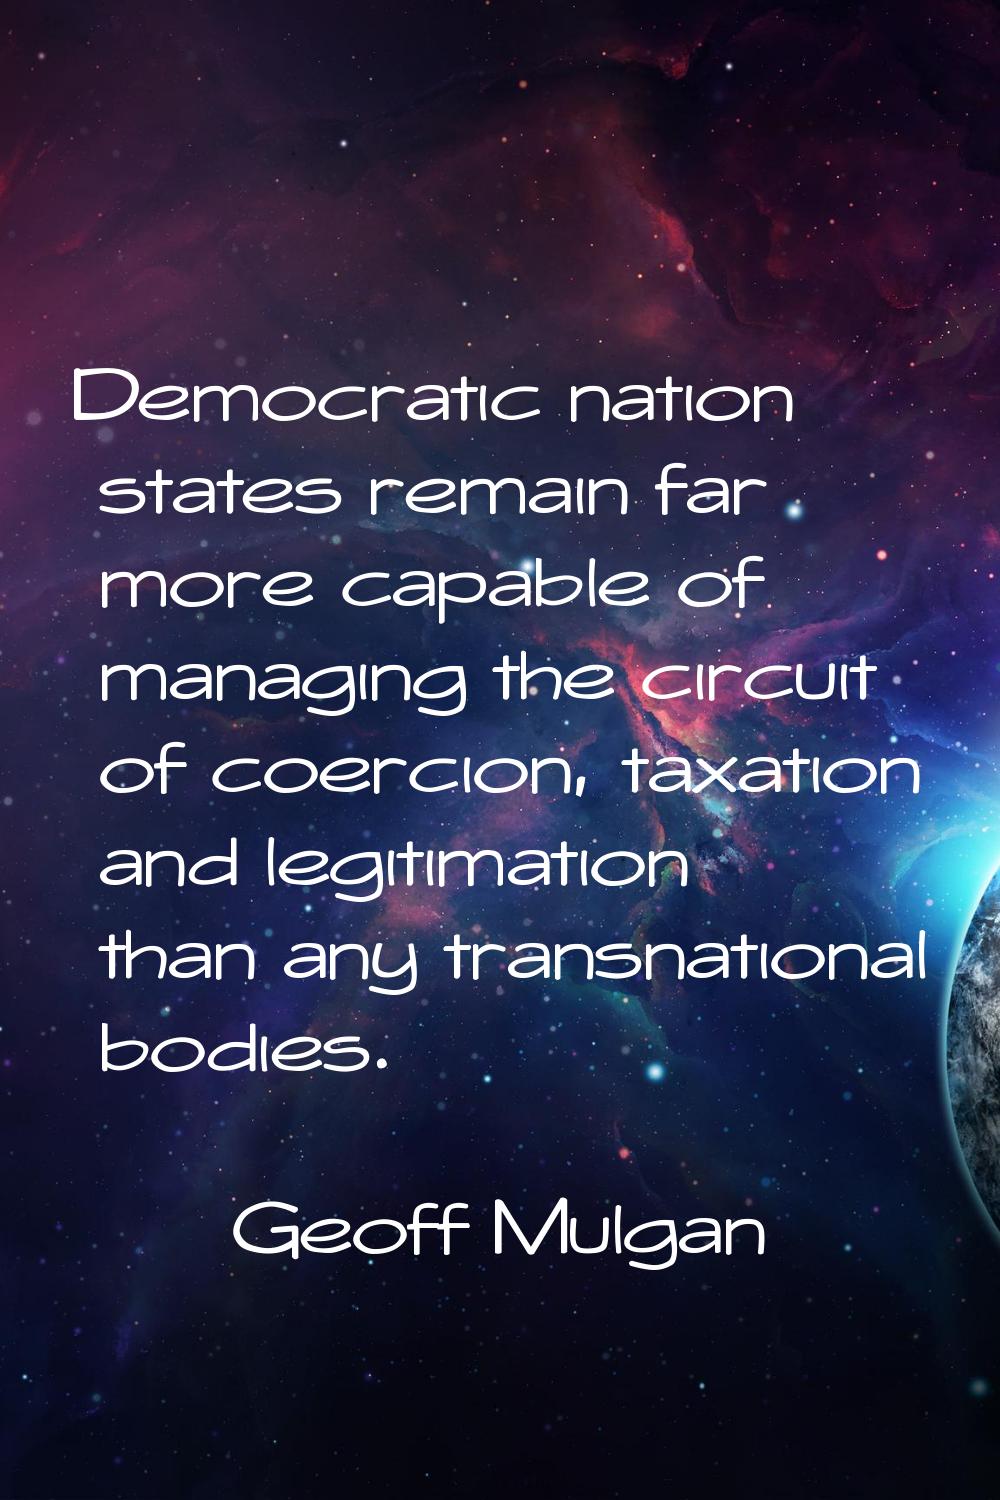 Democratic nation states remain far more capable of managing the circuit of coercion, taxation and 